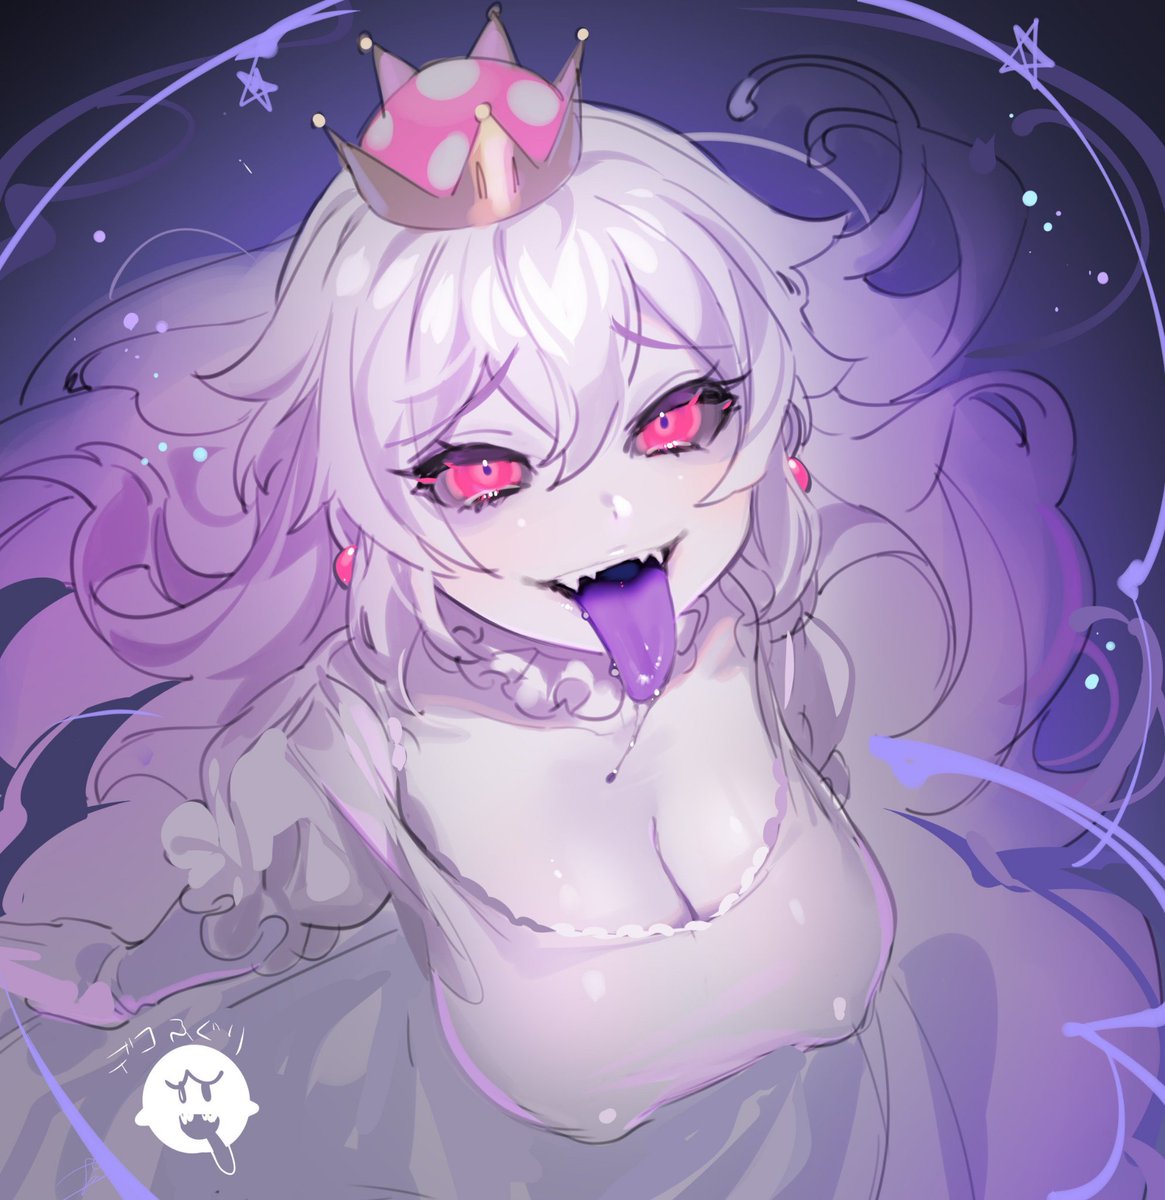 AND KING BOOETTE IS A BETTER NAME THAN #Boosette, KING BOO HAS NO S.